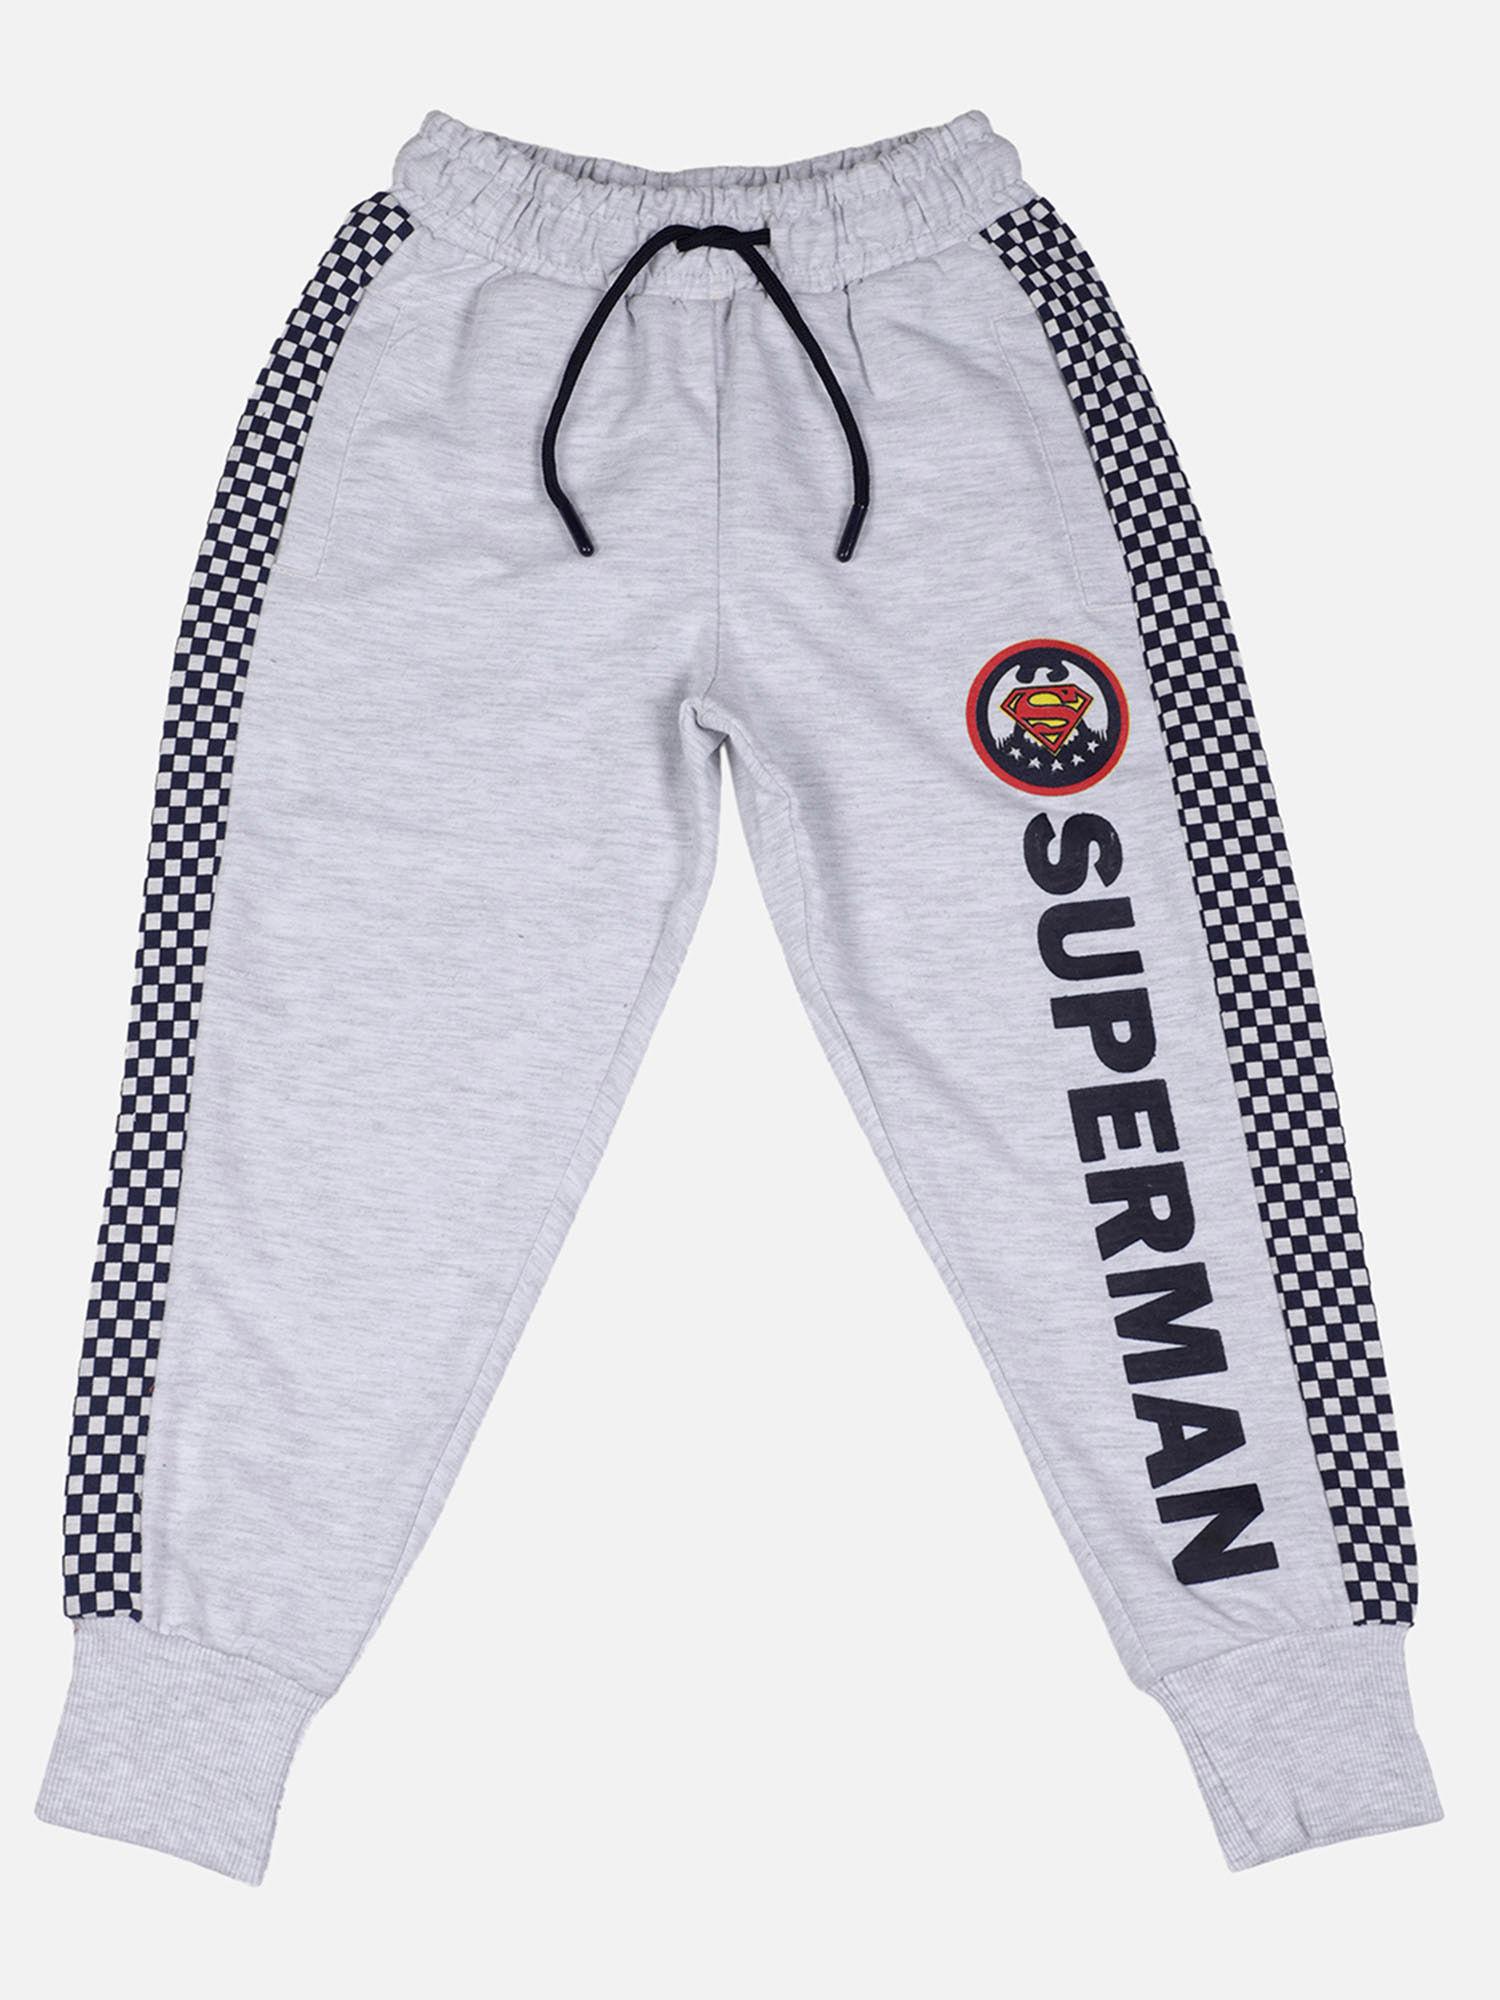 superman featured grey joggers for boys